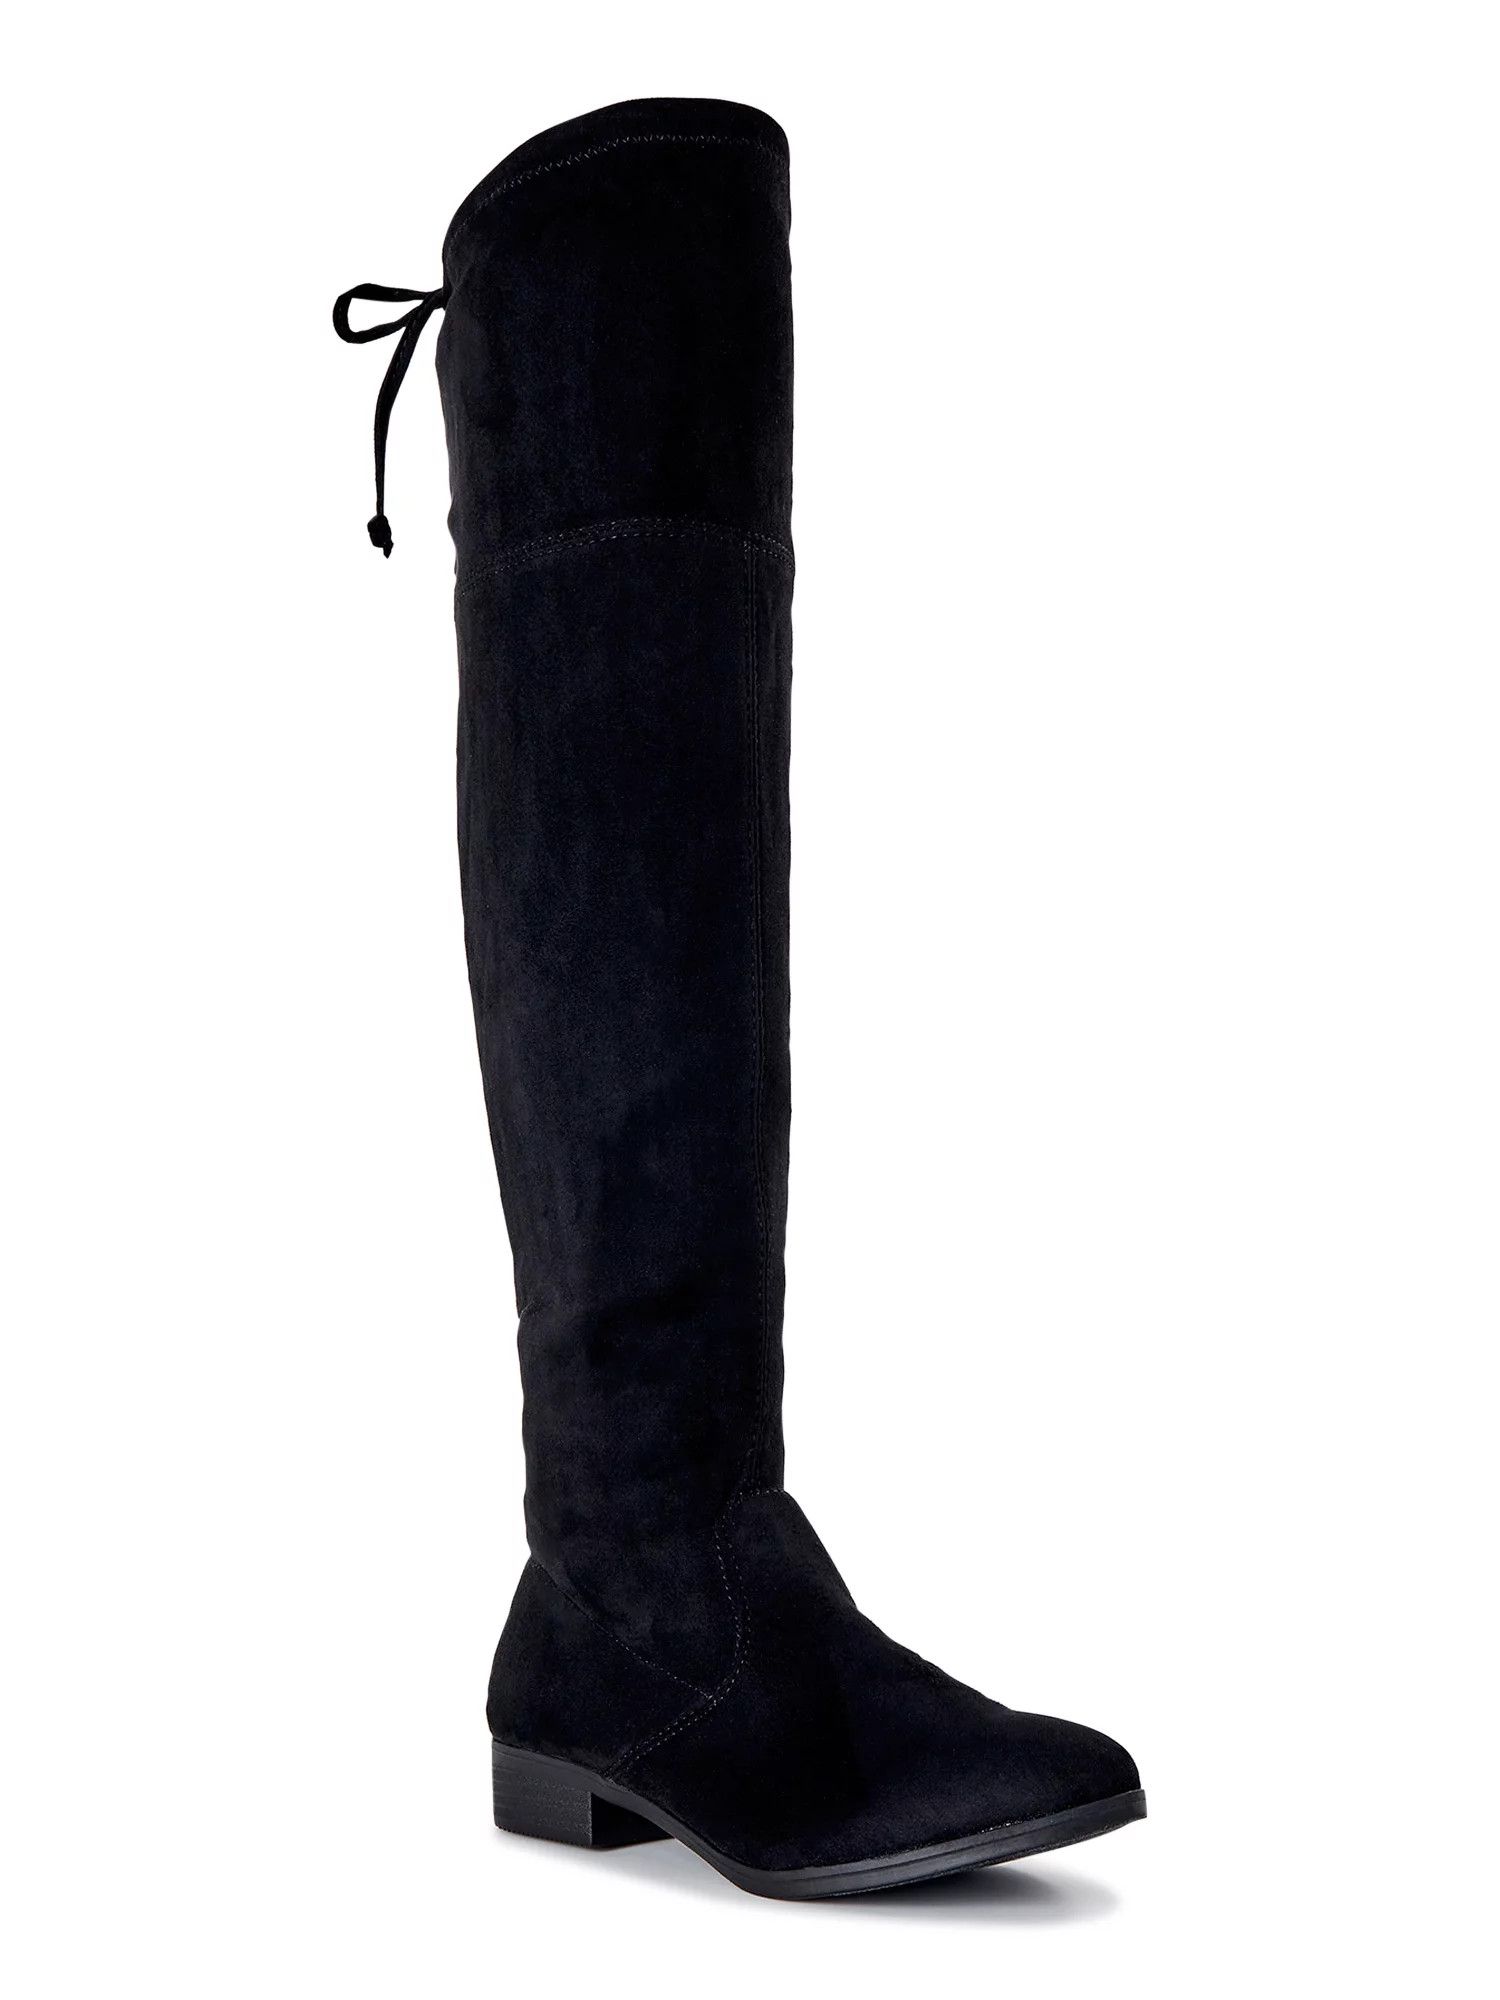 Black Leather Boots, Black Boots Outfit, Tall Black Boots, Black Tall Boots, Walmart Boots | Walmart (US)